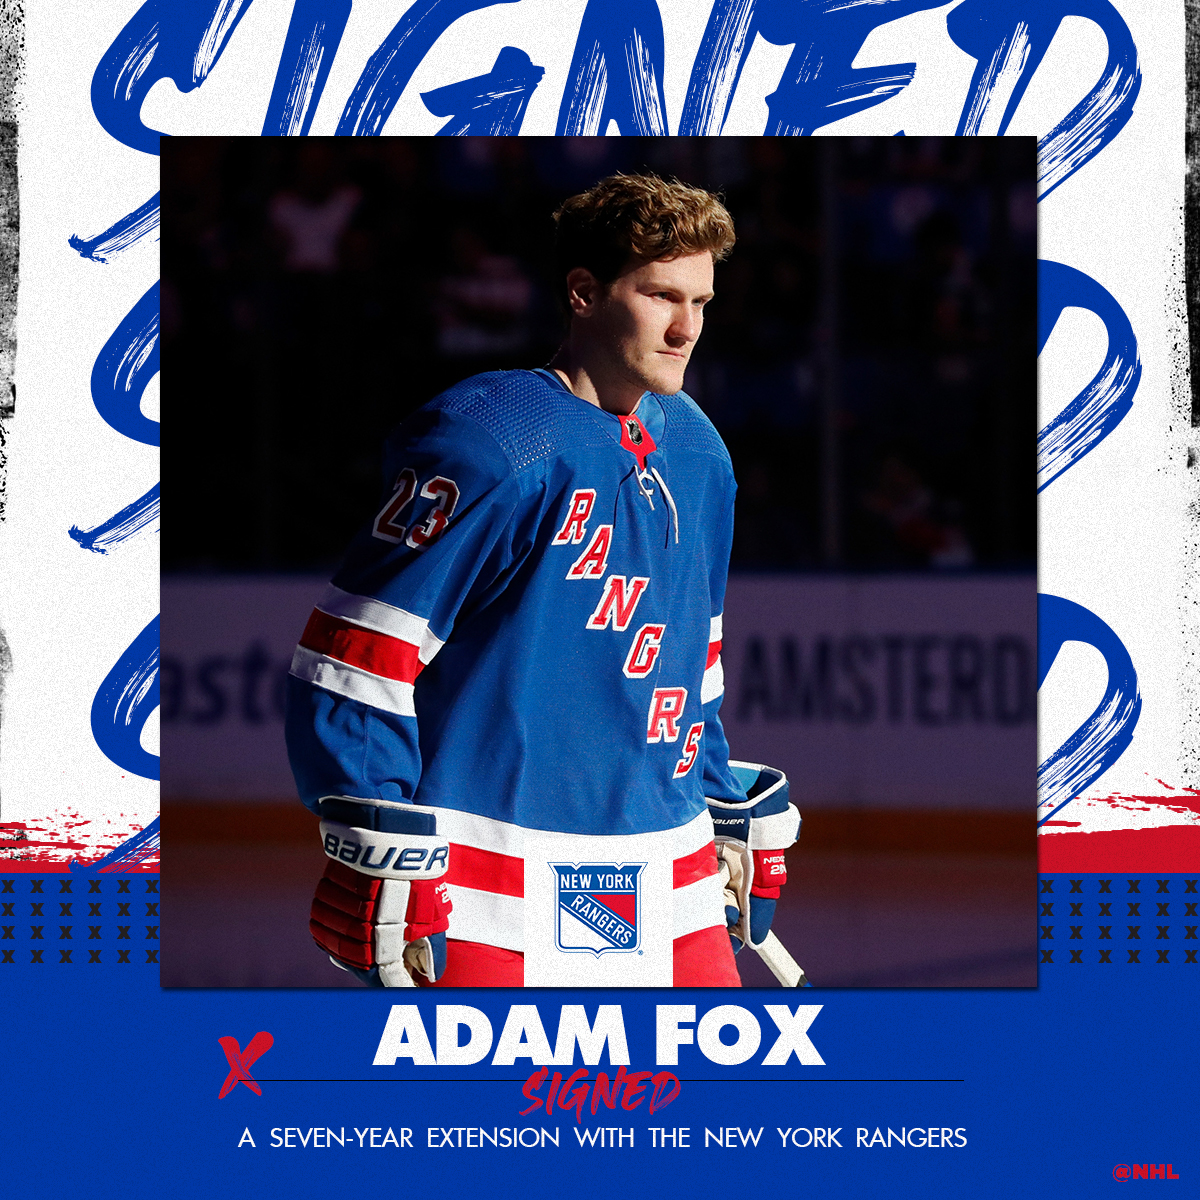 Adam Fox on X: Honored to be named to the #NHL22 Team of the Year